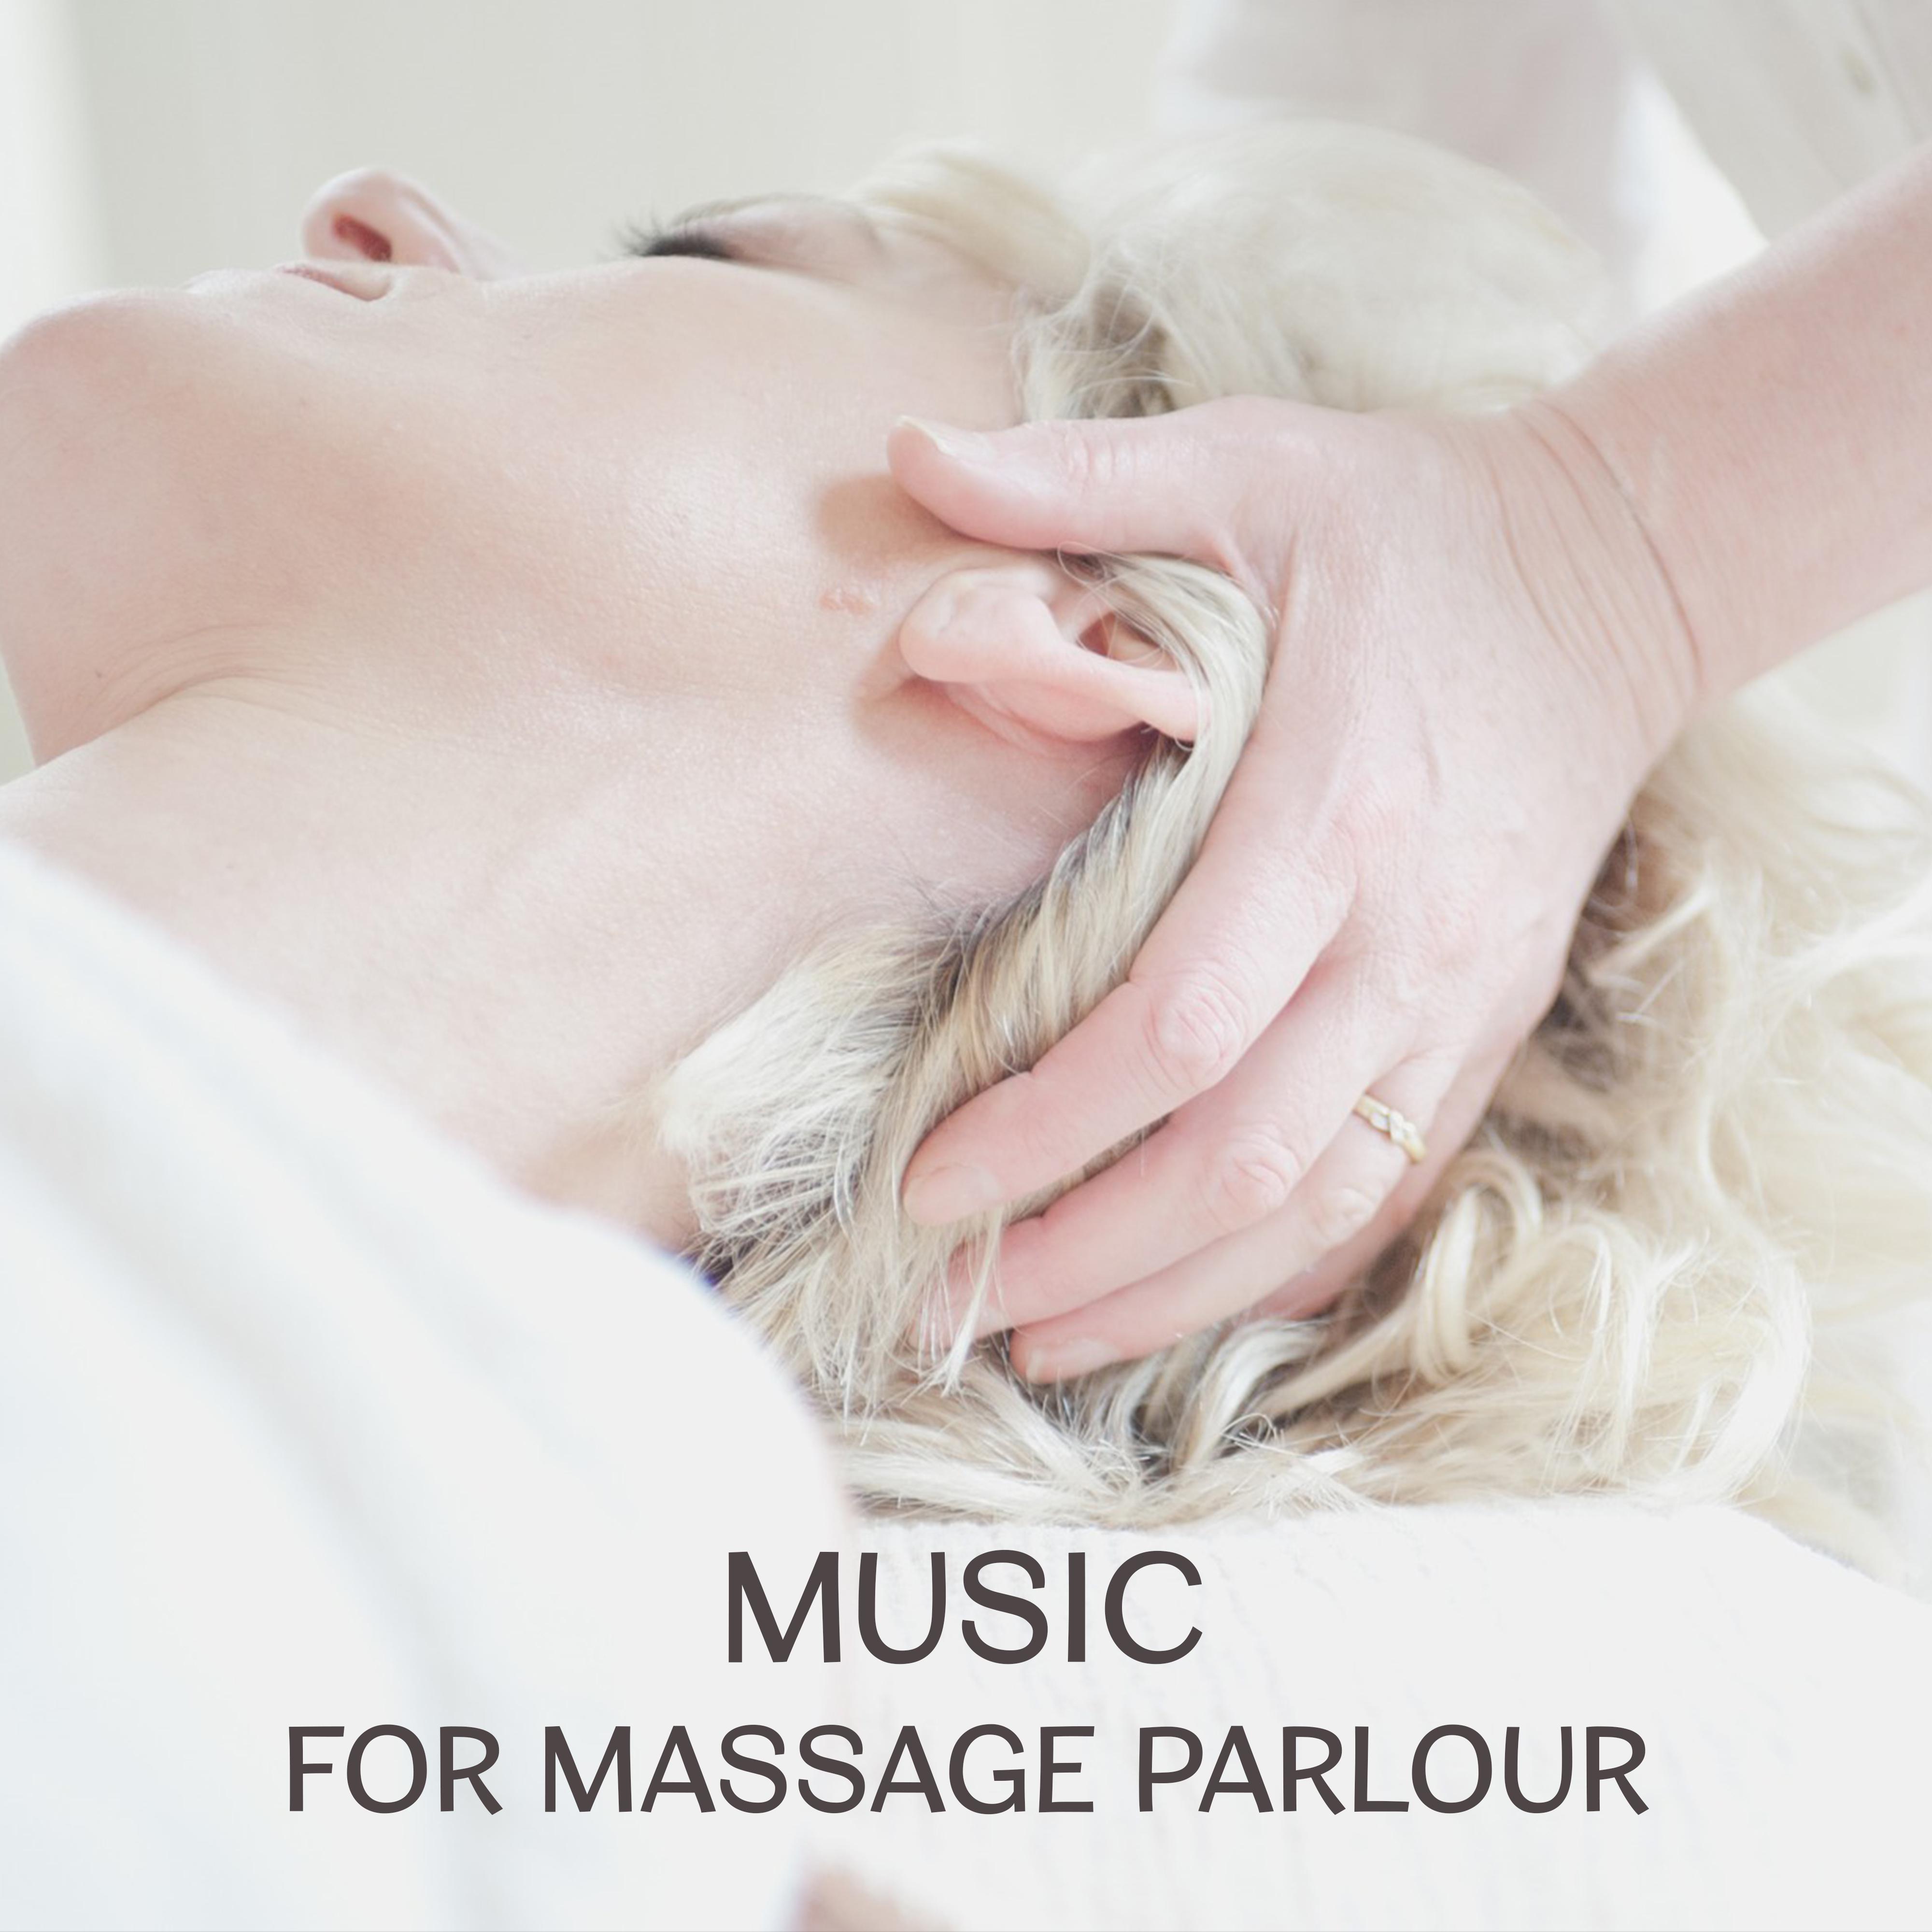 Music for Massage Parlour – Serenity Spa Music, Music for Massage, Relaxing Music Therapy, Deep Relaxation, Finest Selected New Age Songs